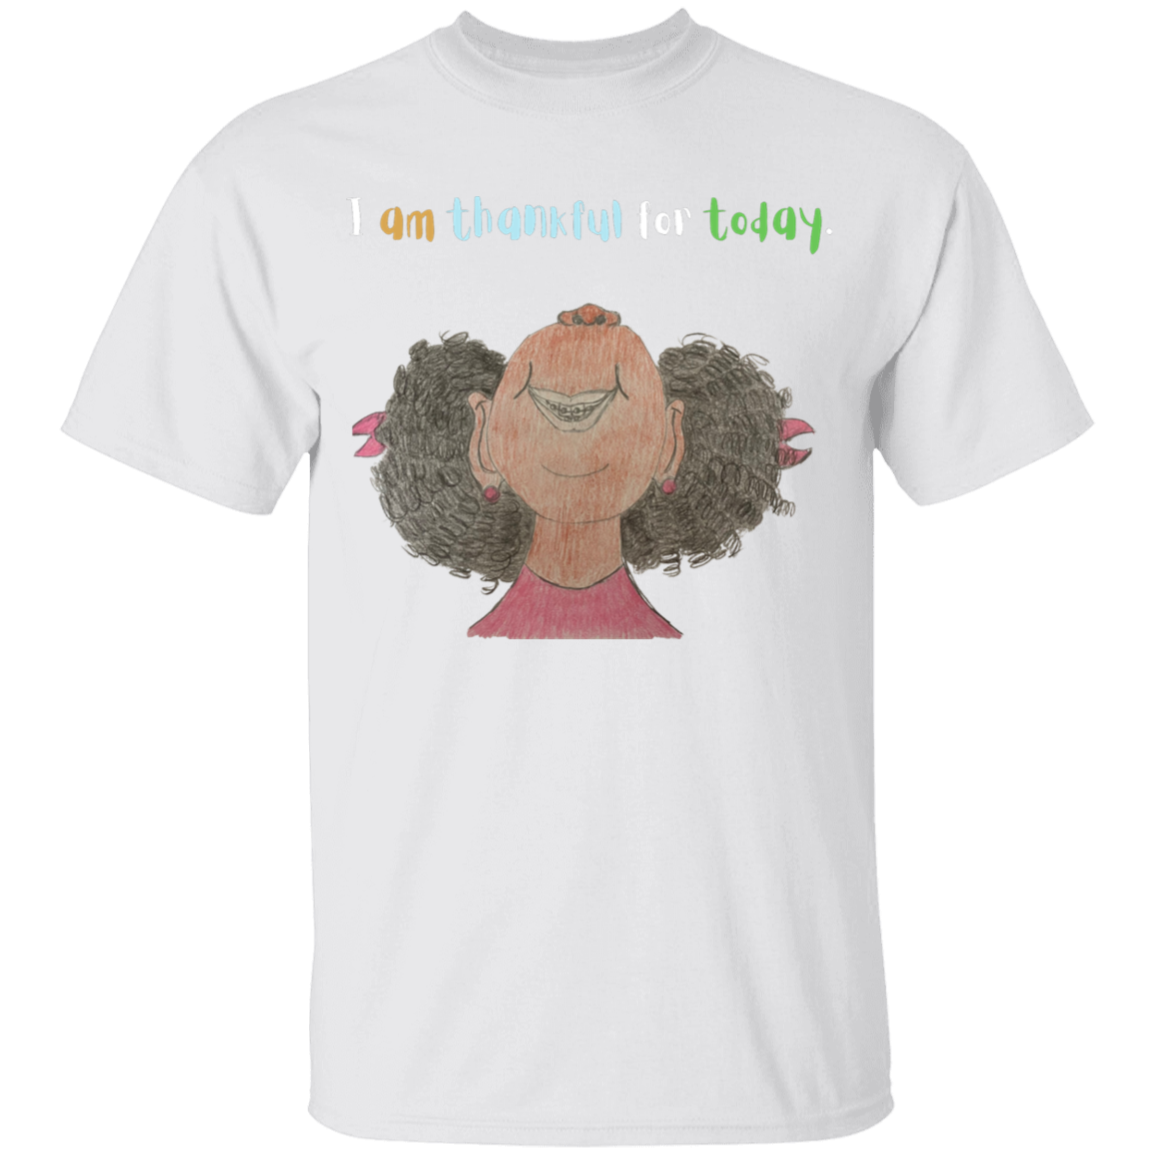 I am thankful for today Youth 5.3 oz 100% Cotton T-Shirt